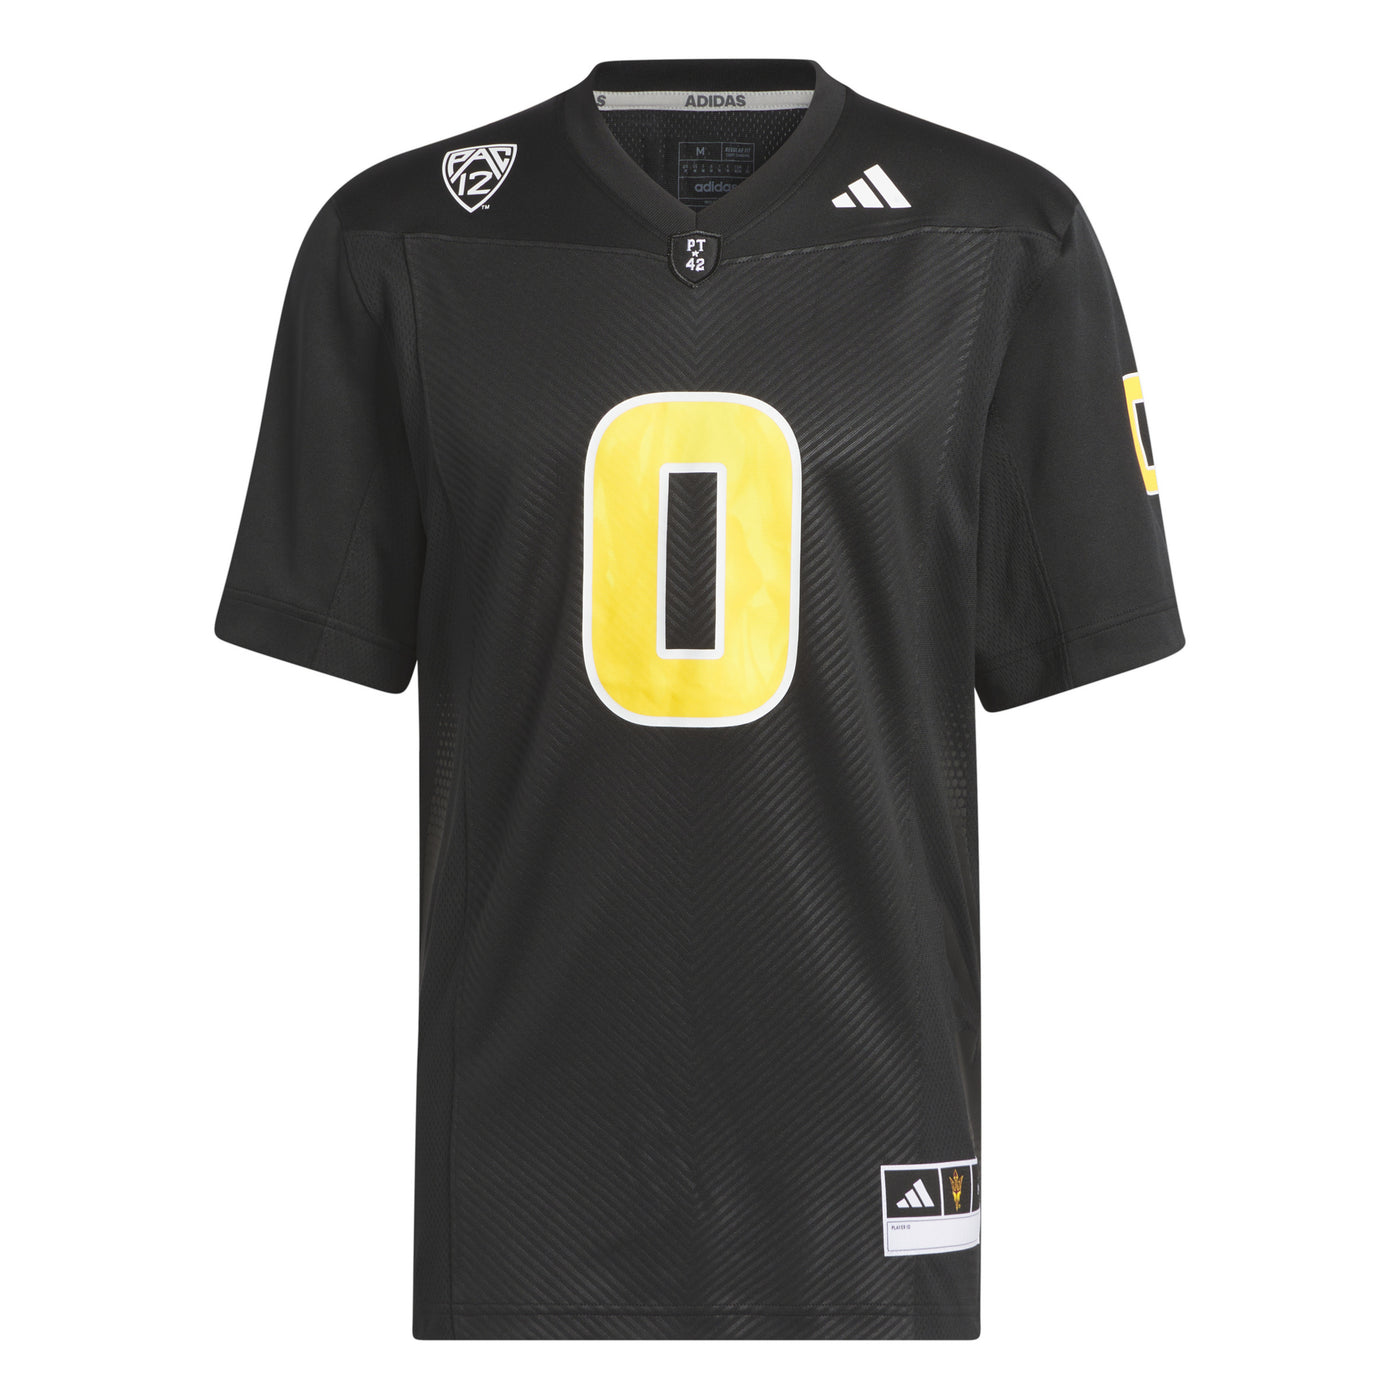 ASU black football jersey with gold number 0 outlined in white. Pac 12 logo and adidas logo both in white on either shoulders.